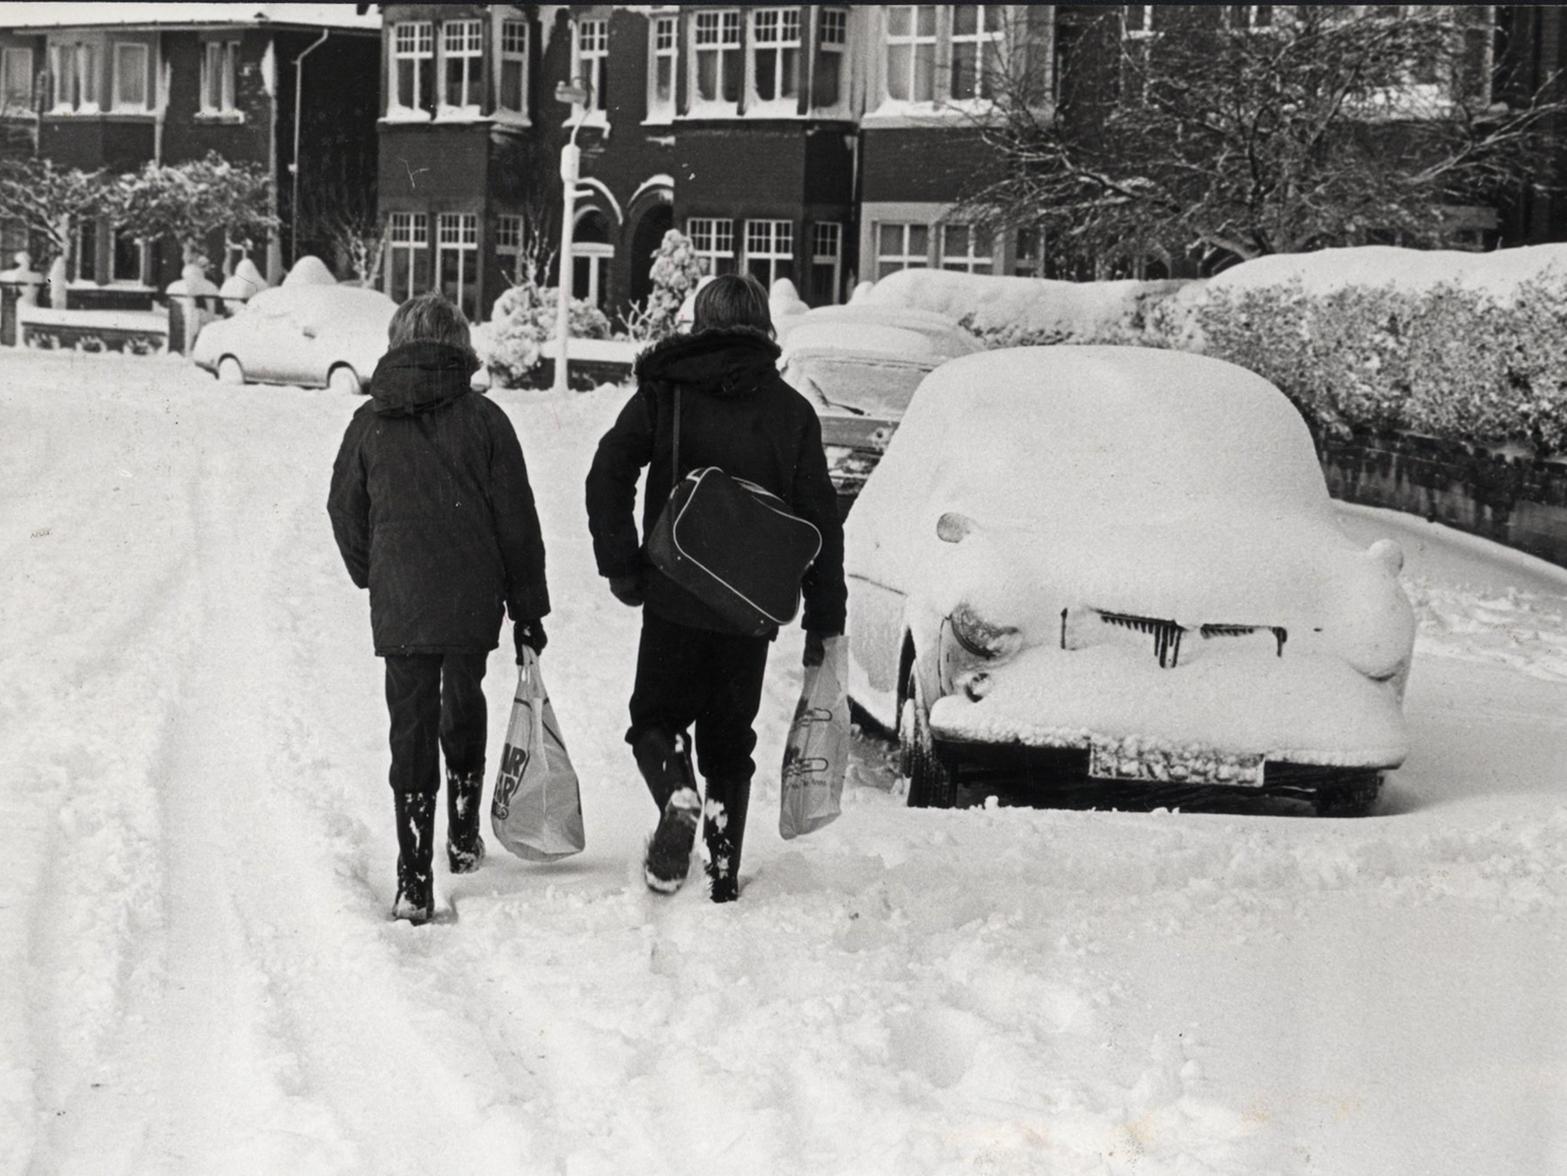 Most schools were closed for a day or two when the snow fell in January 1982, but these hardy chaps were determined to get through in Fairhaven.